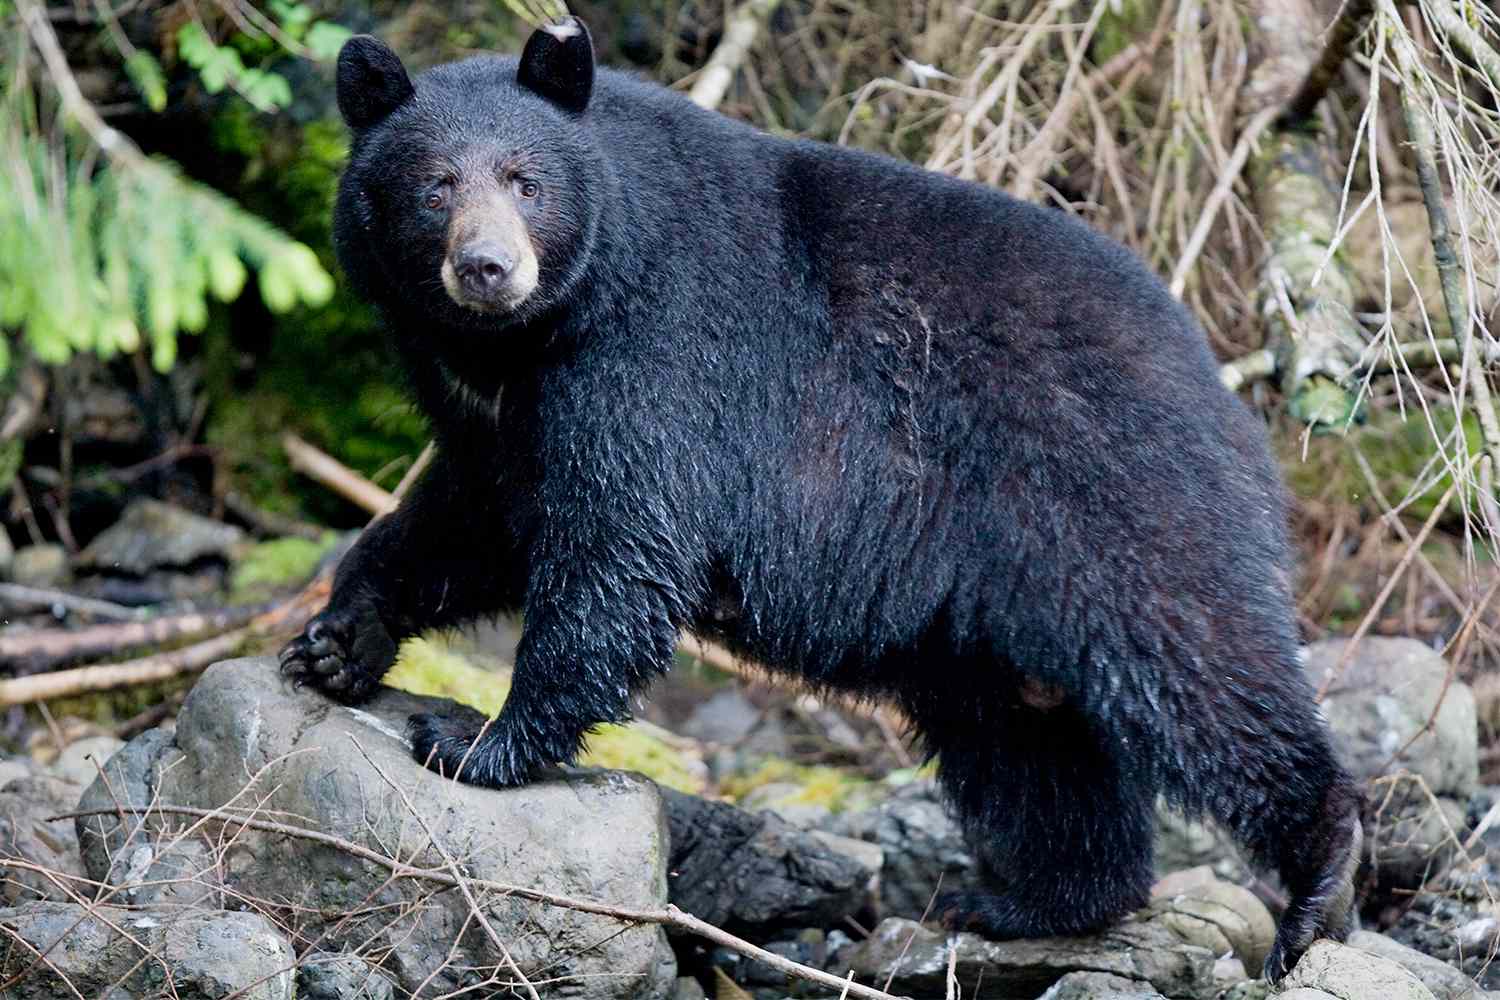 Wis. Couple Kills Bear After Being Attacked in Their Home While Their Children Were Asleep